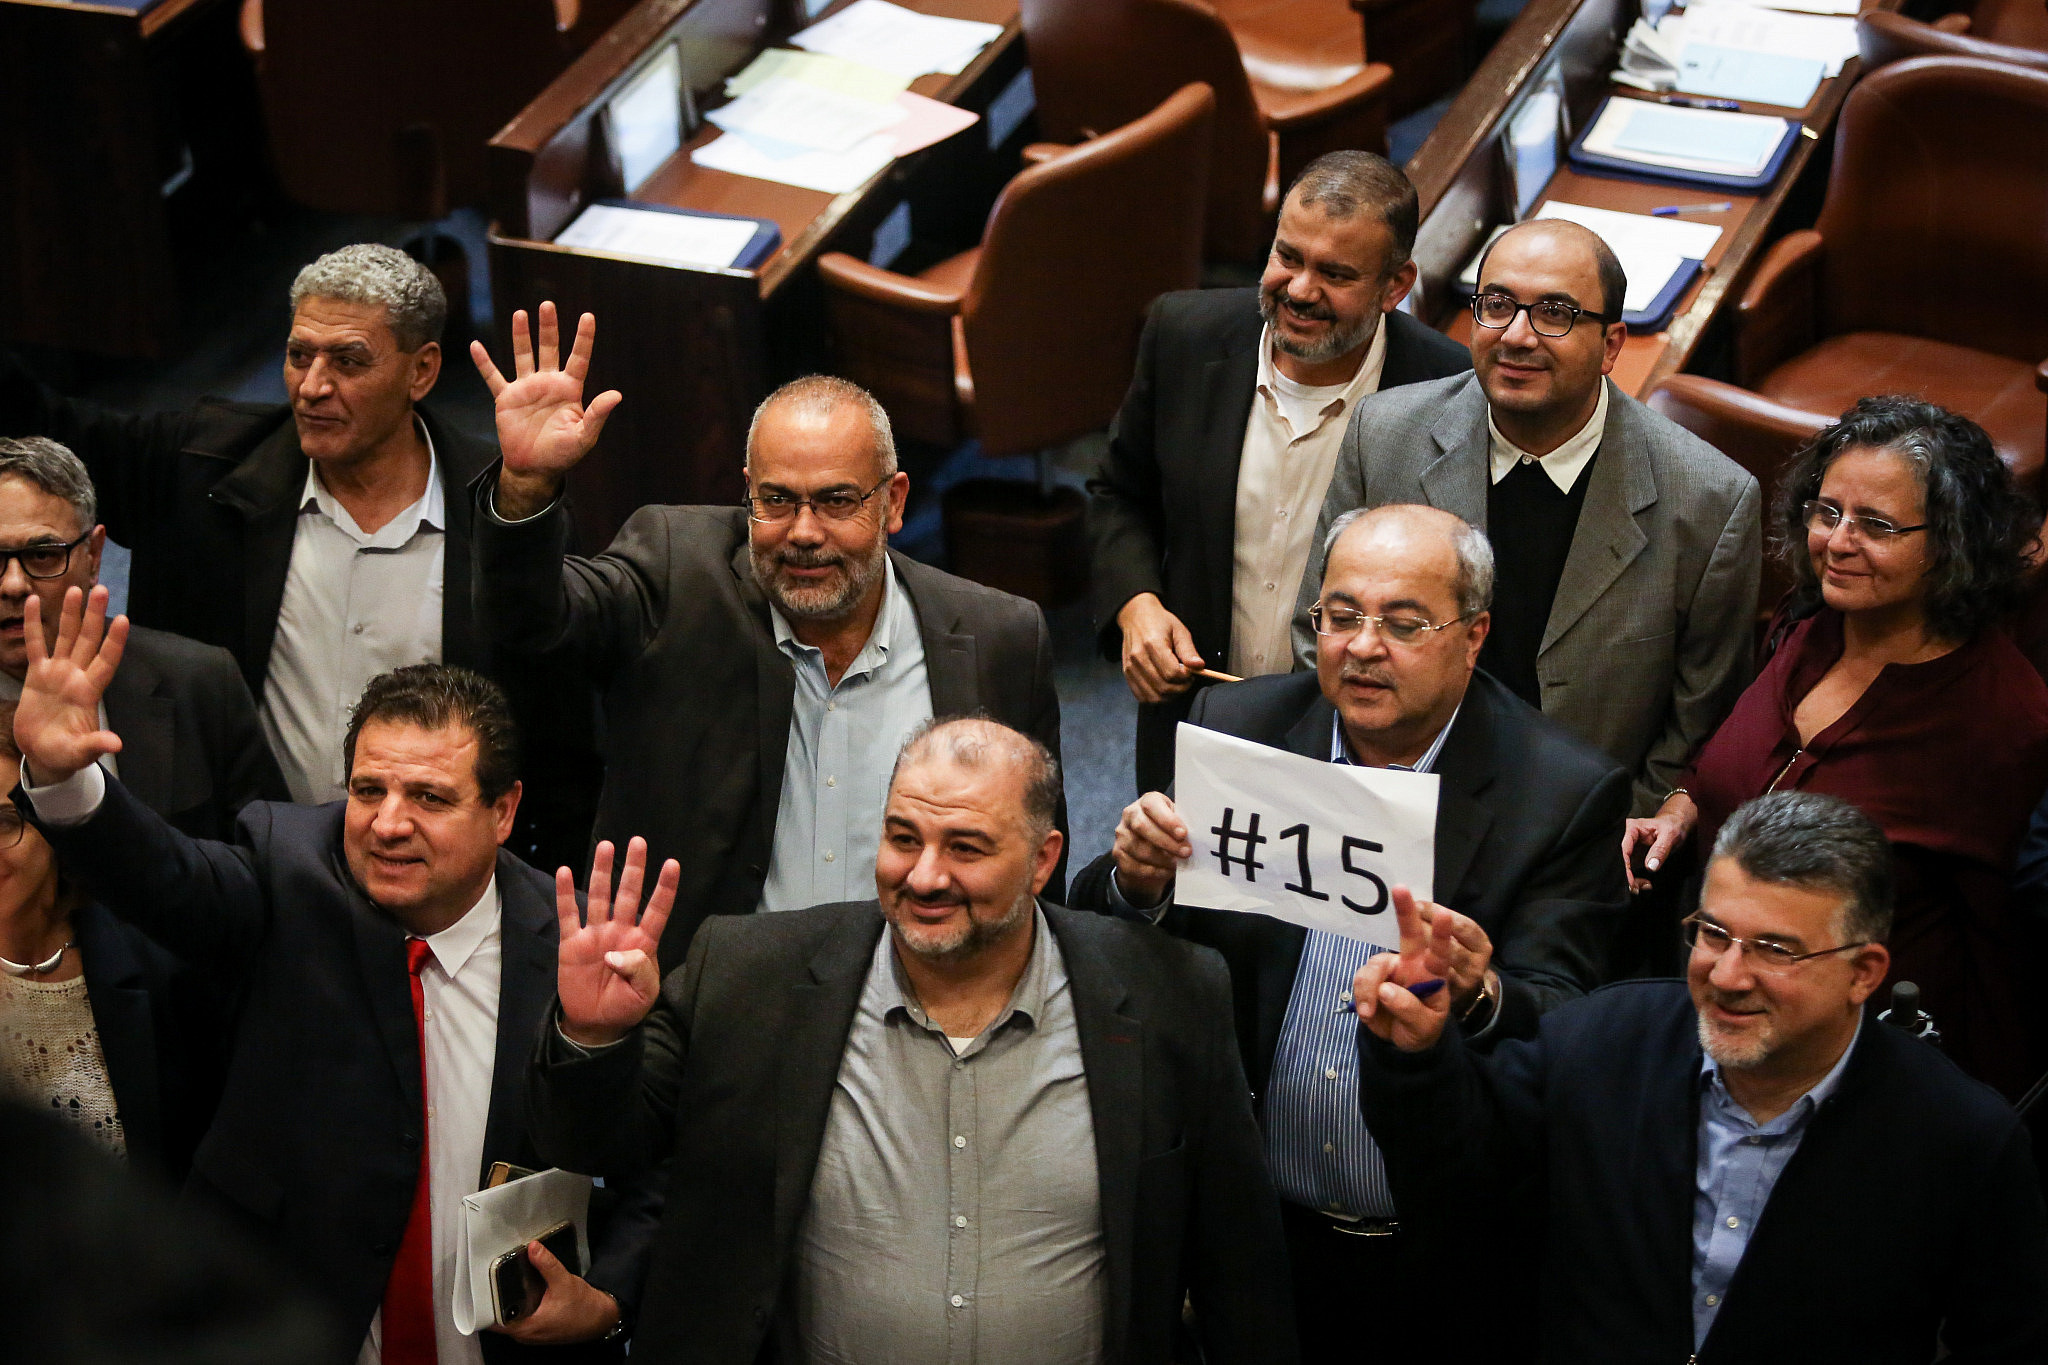 Members of the Arab Joint list seen during a vote on a bill to dissolve the parliament, at the Knesset, in Jerusalem, December 12, 2019. (Olivier Fitoussi/Flash90)